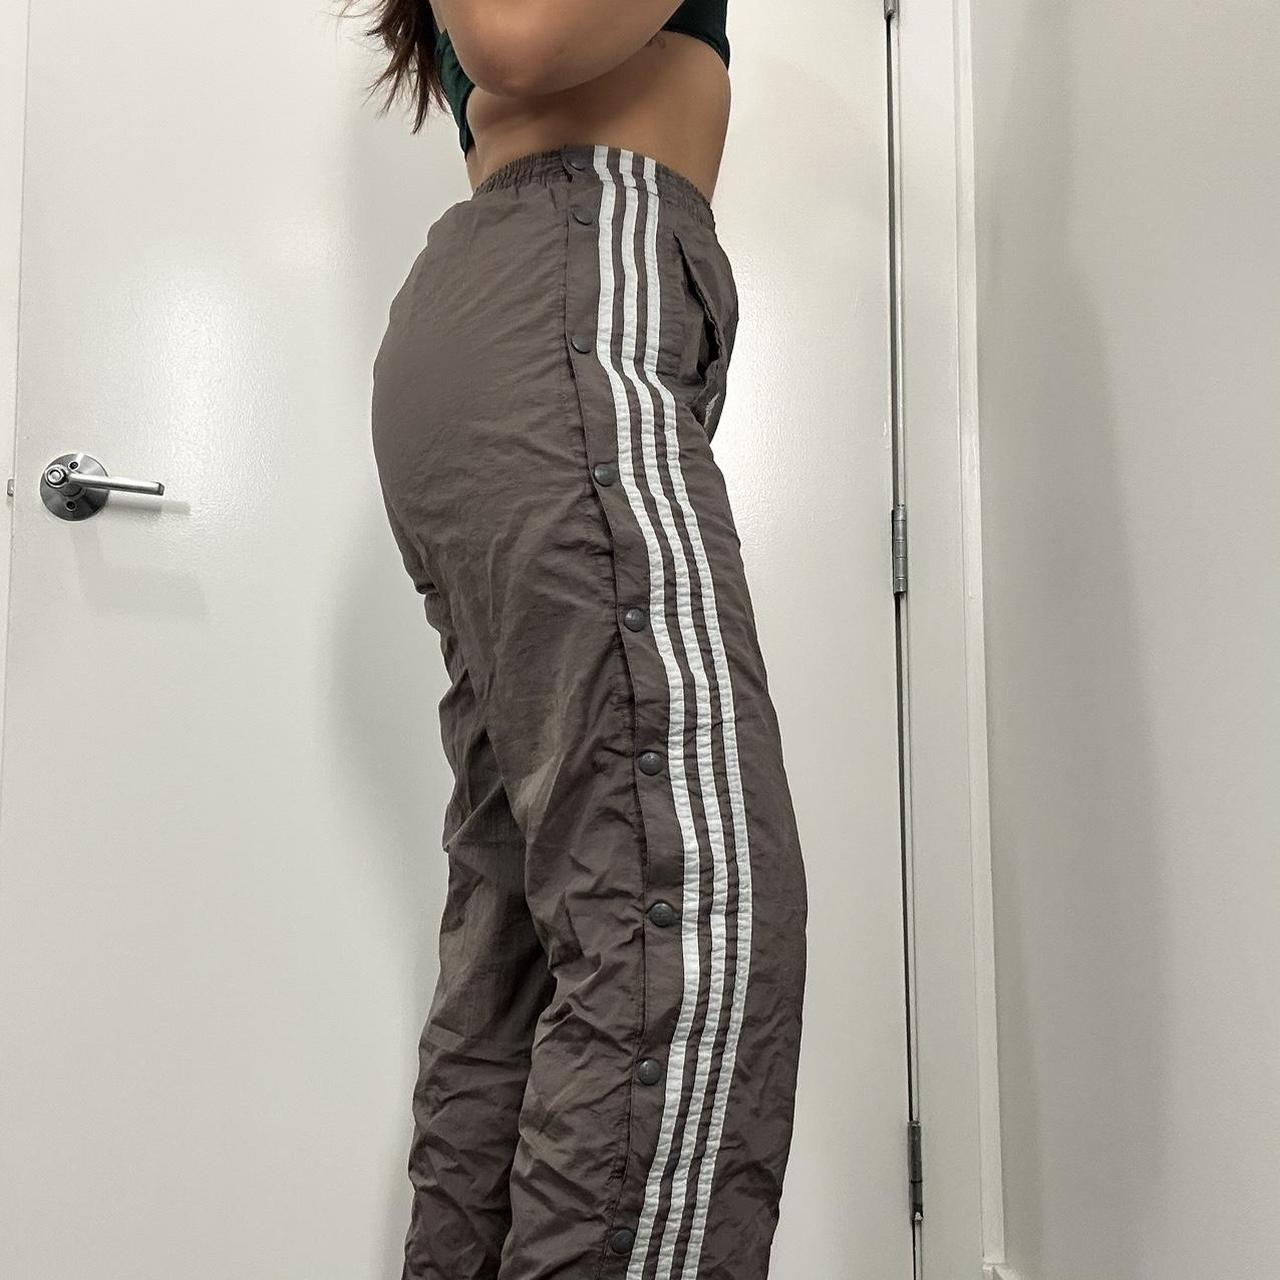 Vintage adidas track pants OPEN TO OFFERS 🤩 -tear... - Depop